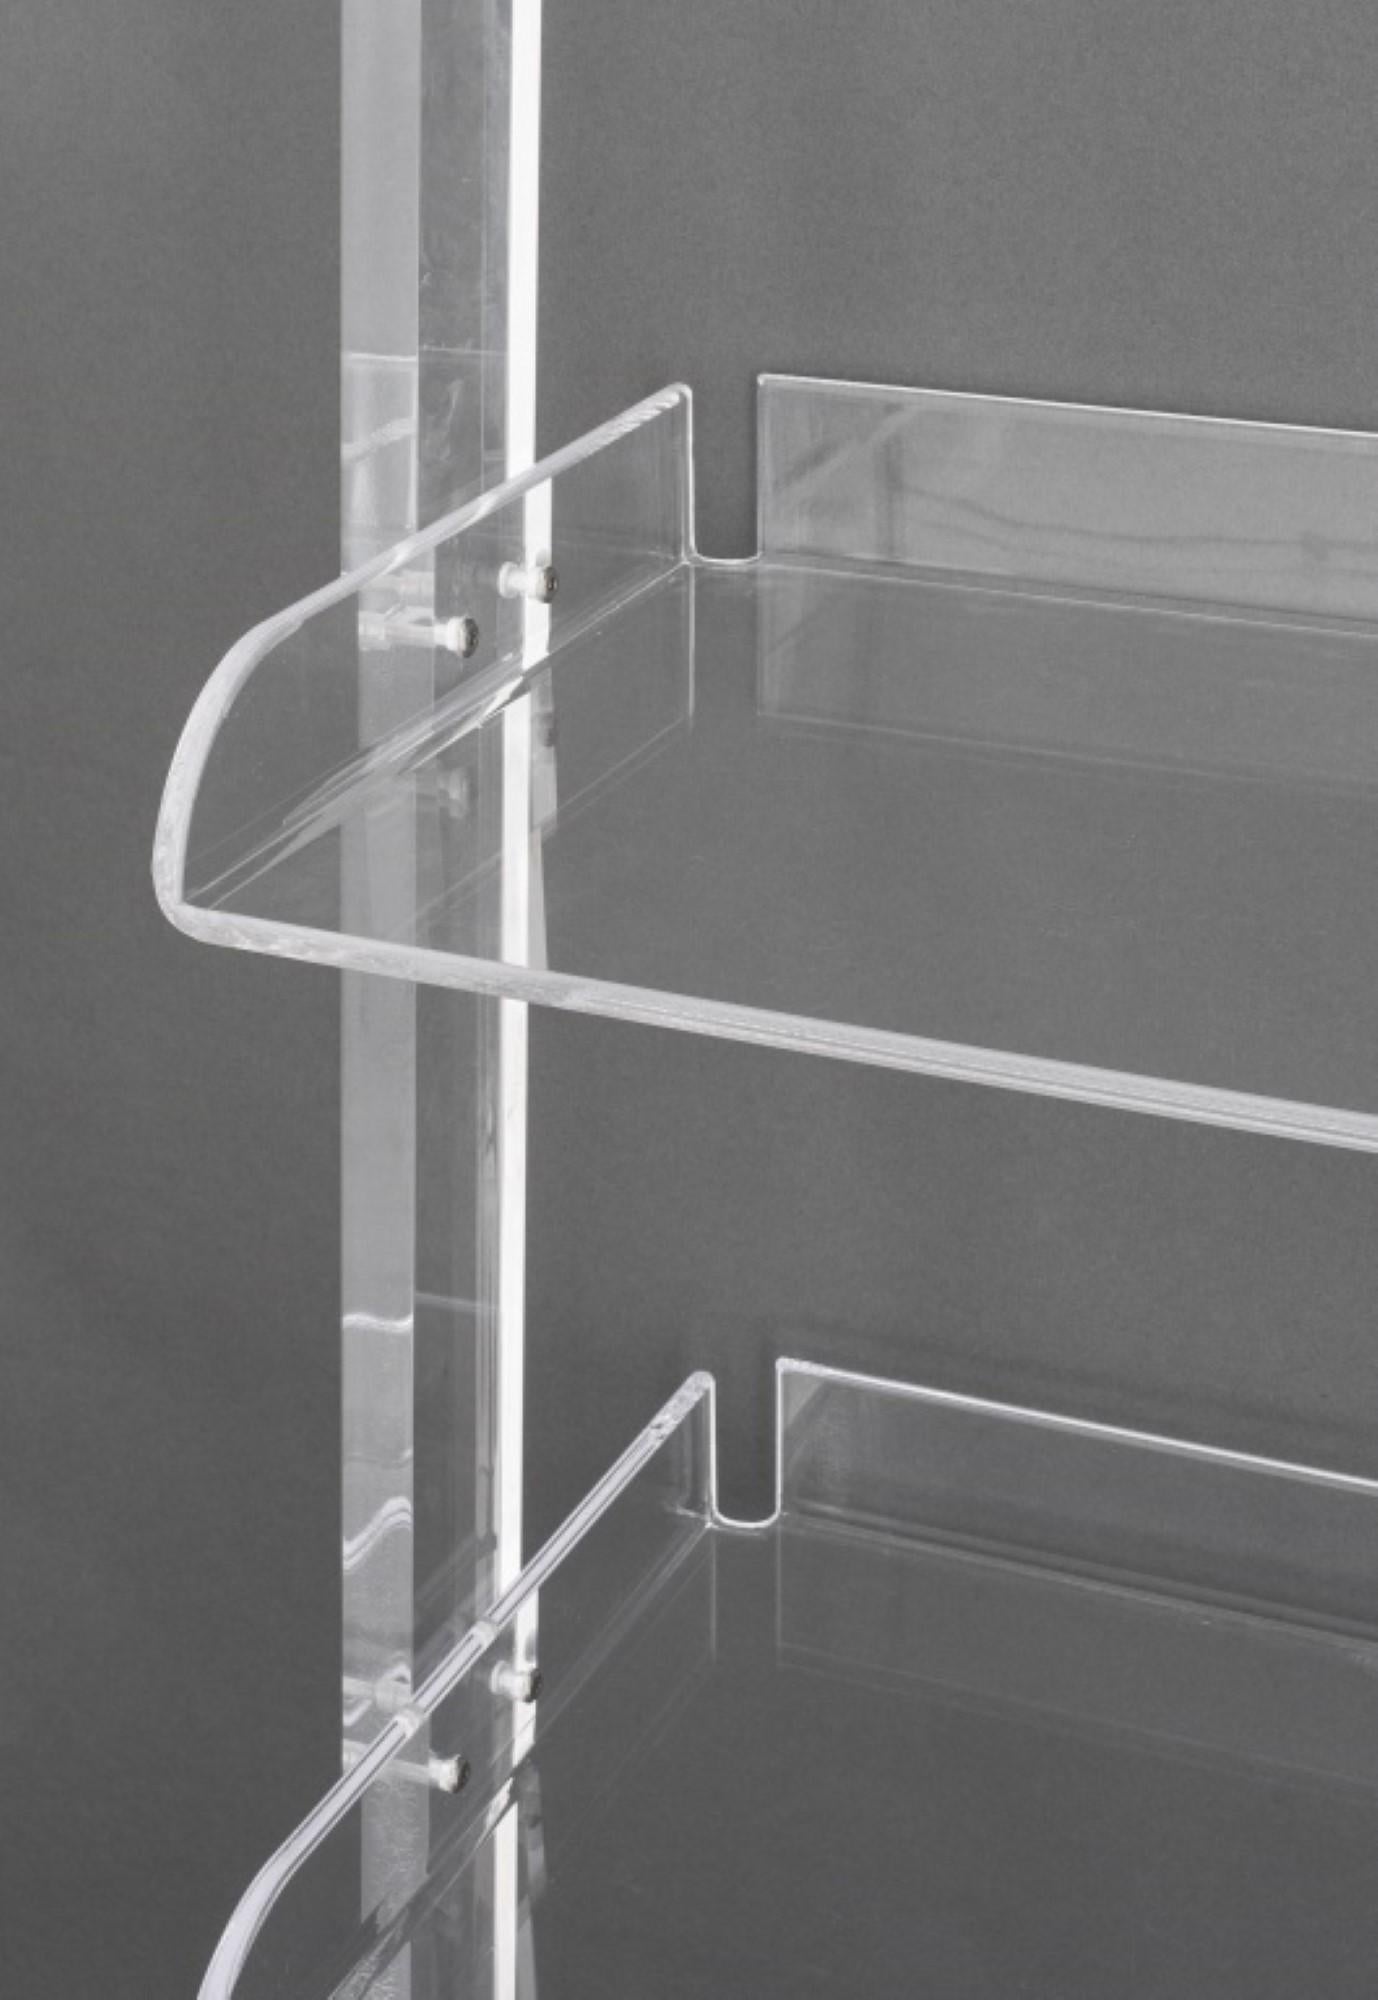 The Modern Minimalist clear acrylic ladder wall shelves have approximate dimensions of 77 inches in height, 33.75 inches in width, and 17.5 inches in depth. Please note that these dimensions are provided as approximations, and actual measurements